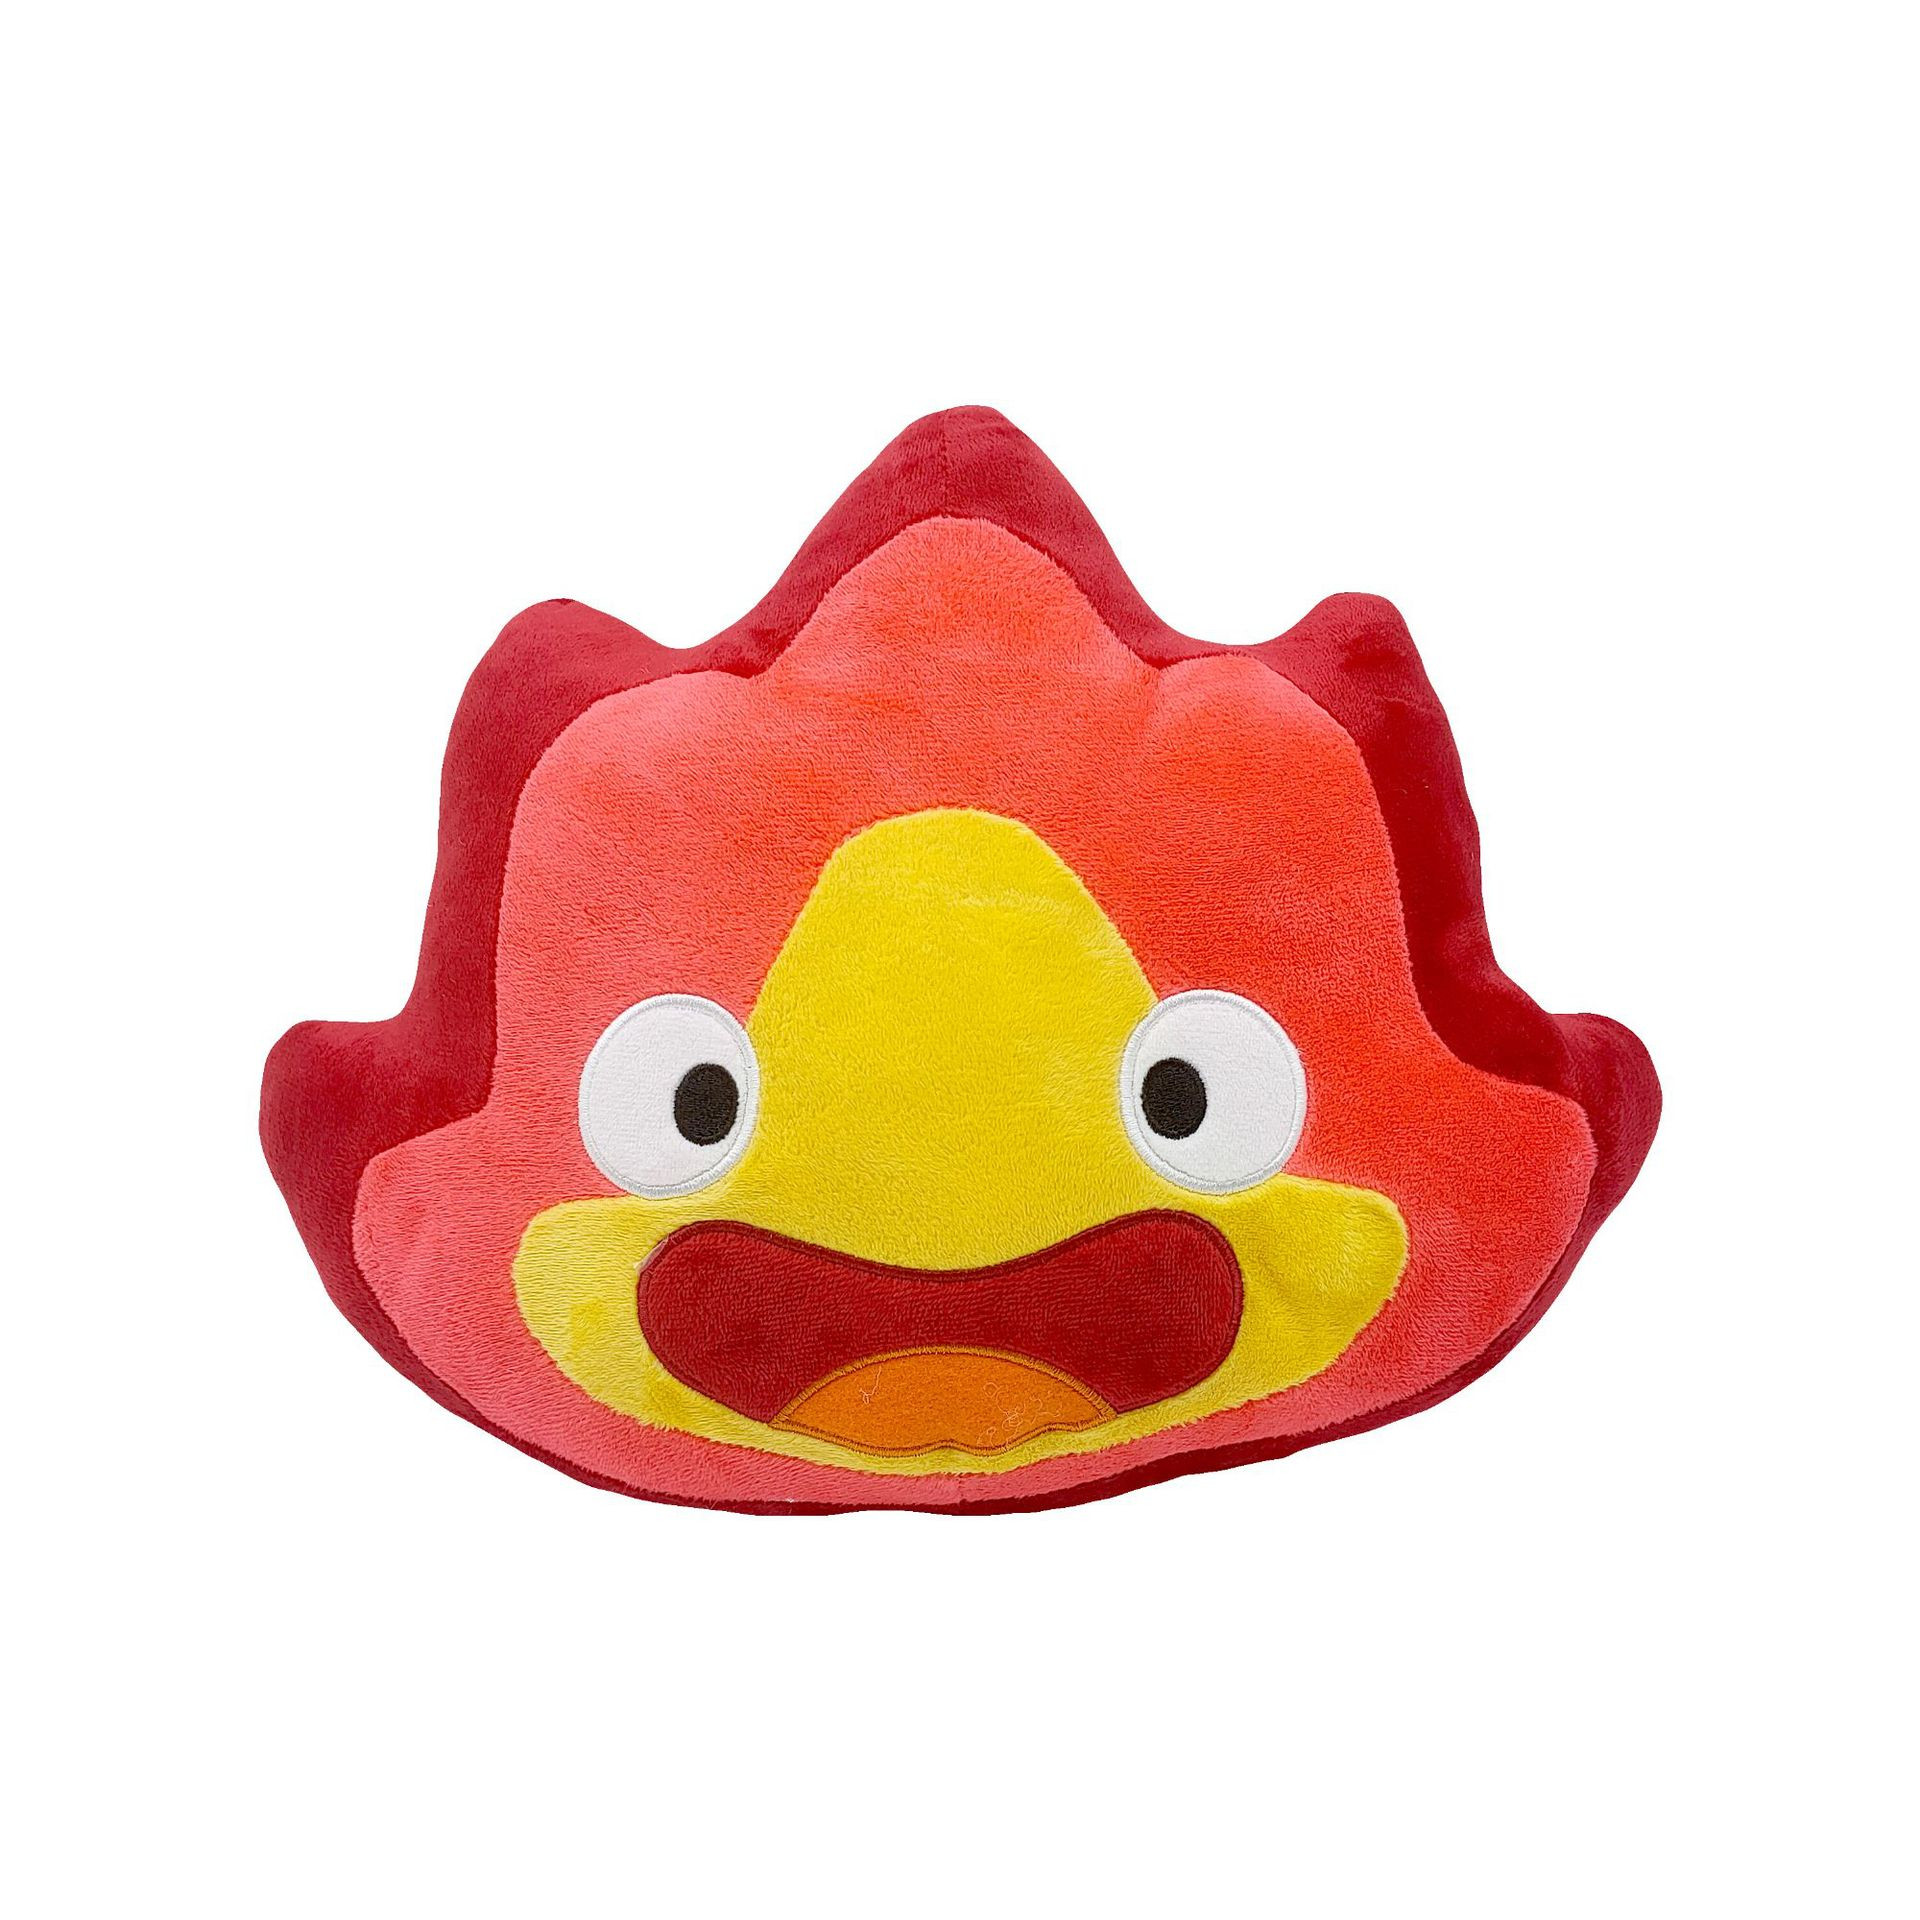 Calcifer From Wizard Howl Plush Toy